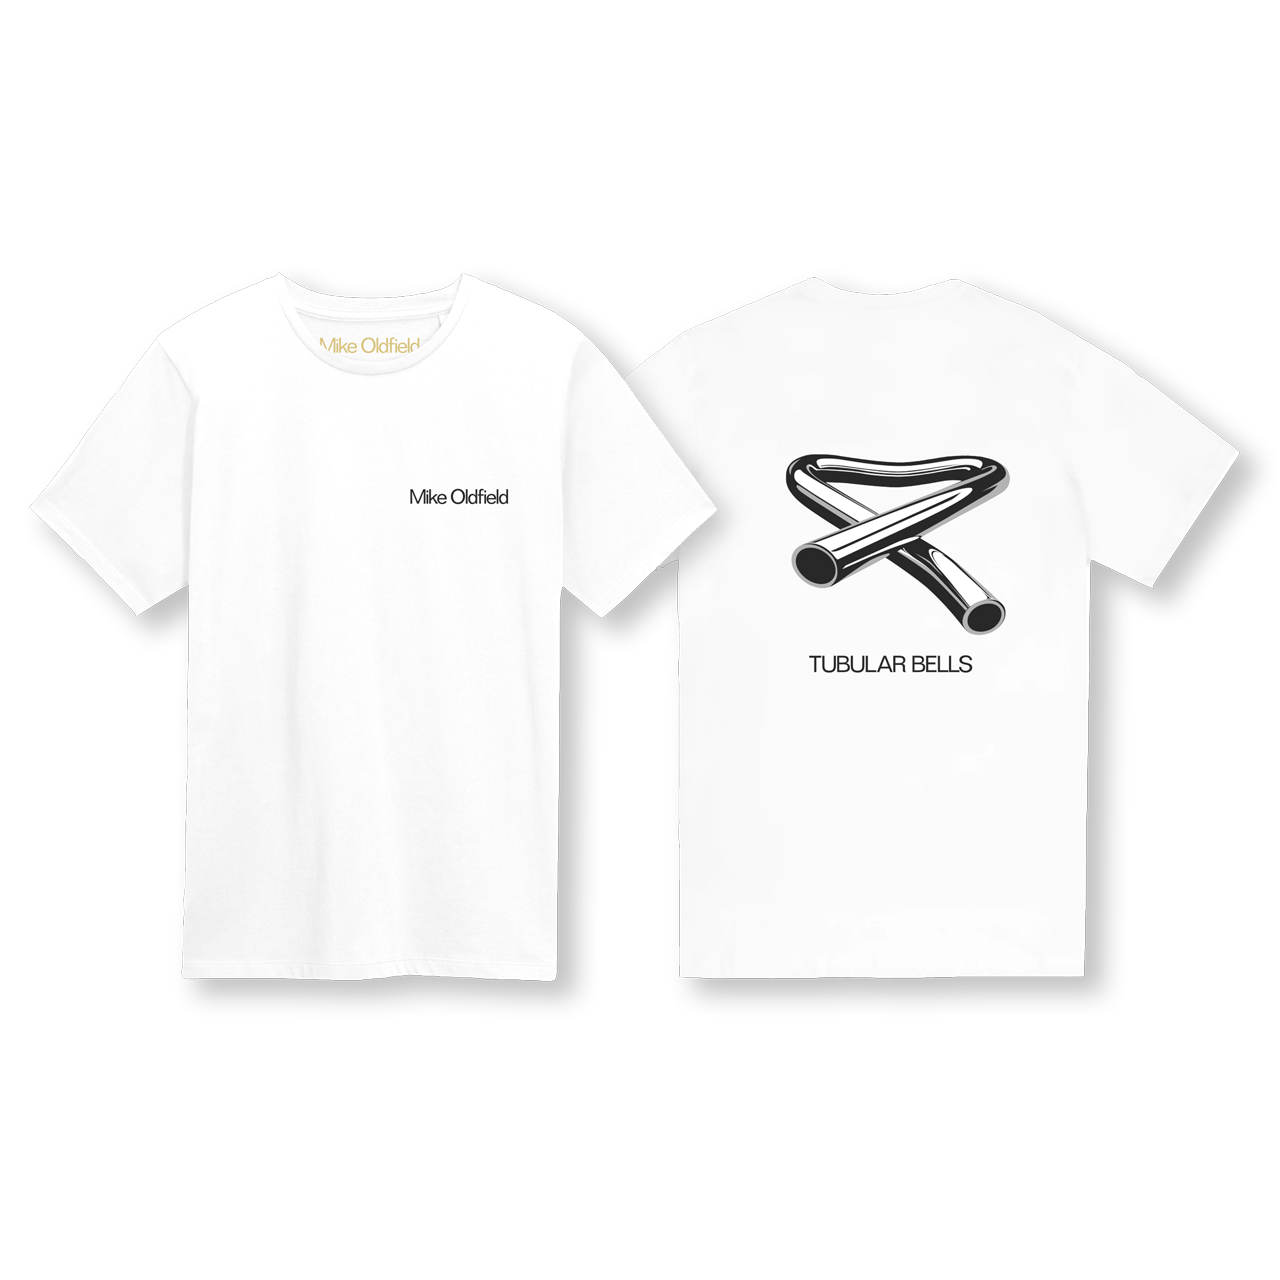 Tubular Bells: White T-Shirt + Limited Edition A2 Print (1/2)